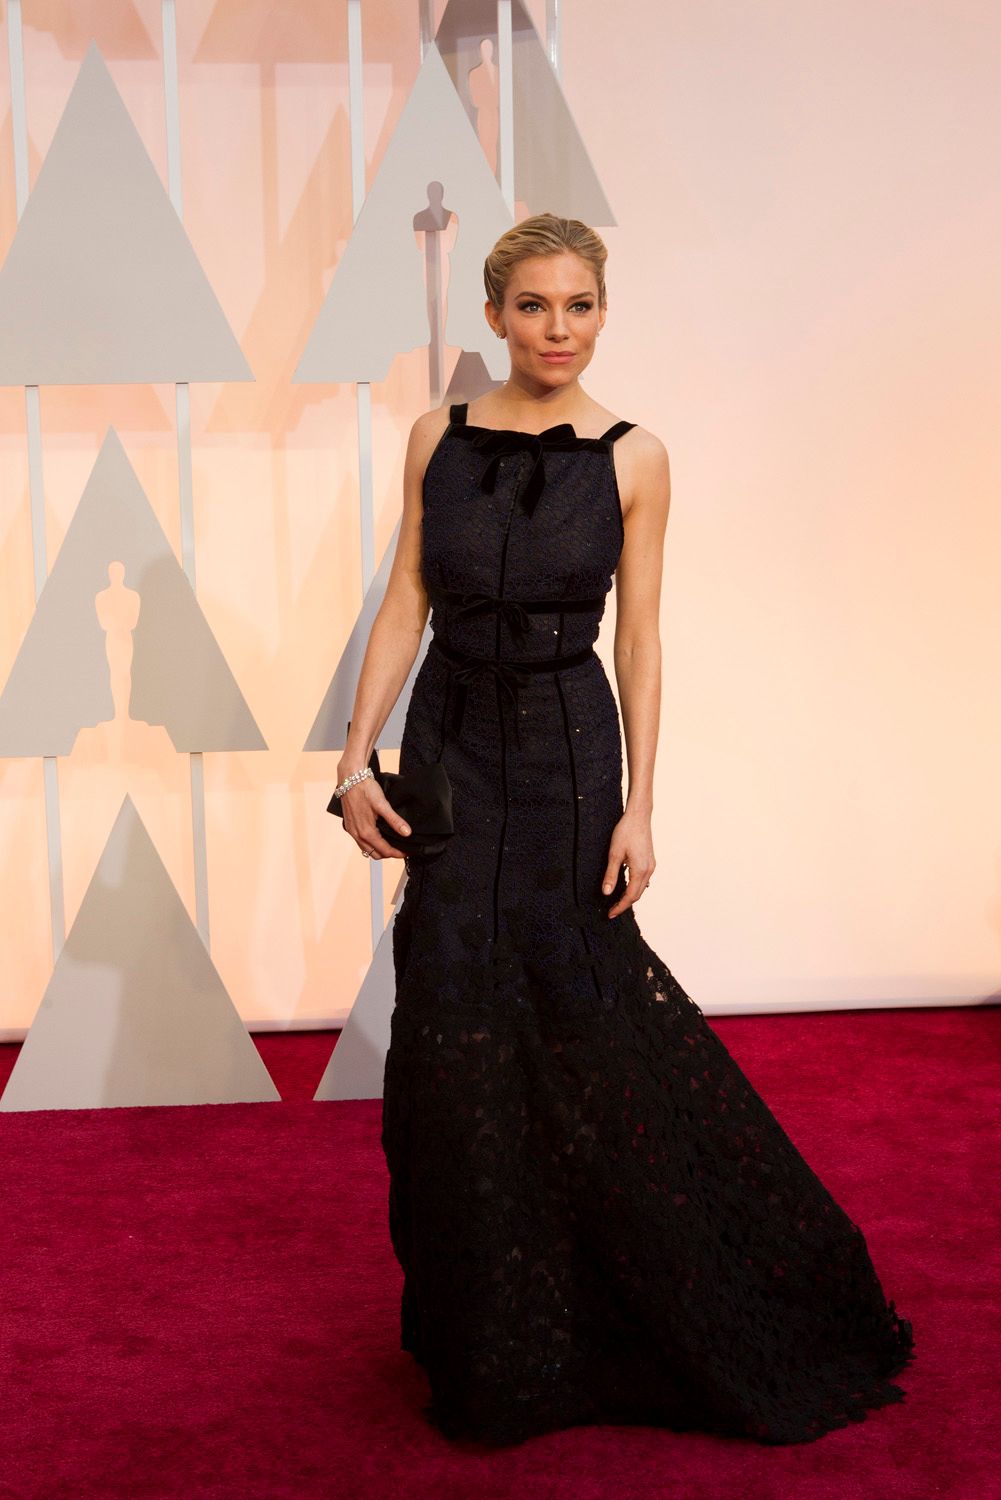 Sienna Miller in black at the Oscars in 2015